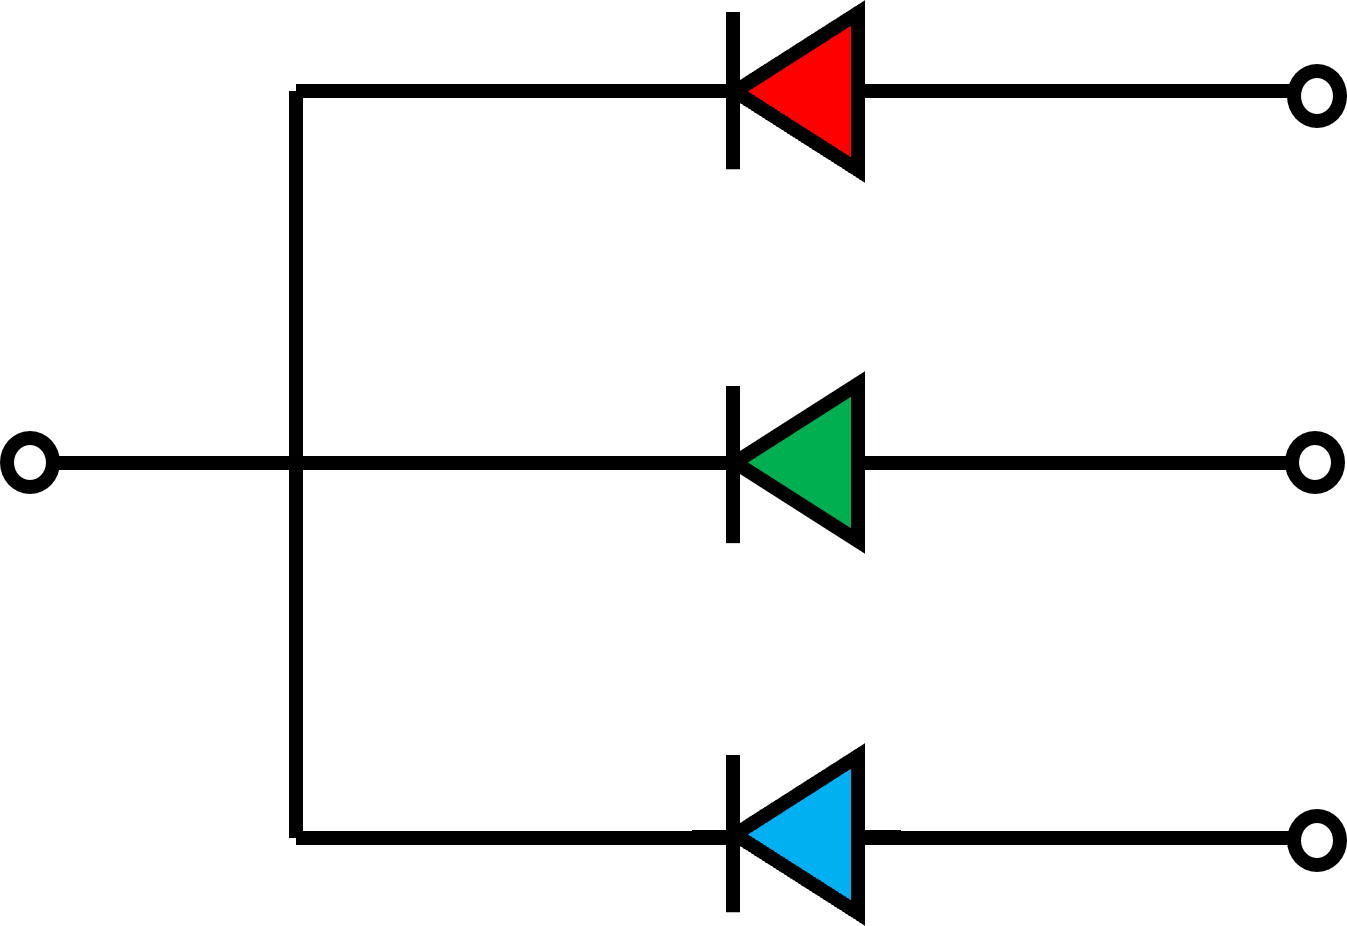 Shown as a wire split into three parallel lines each with a equilateral triangle positioned with a tip pointing back toware the single wire. There is then a line, the same height as the triangle drawn at this tip. The triangles are coloured; the top is red, the middle is green and the bottom is blue. The wire ends are marked with a small circle to illustrate connection points.